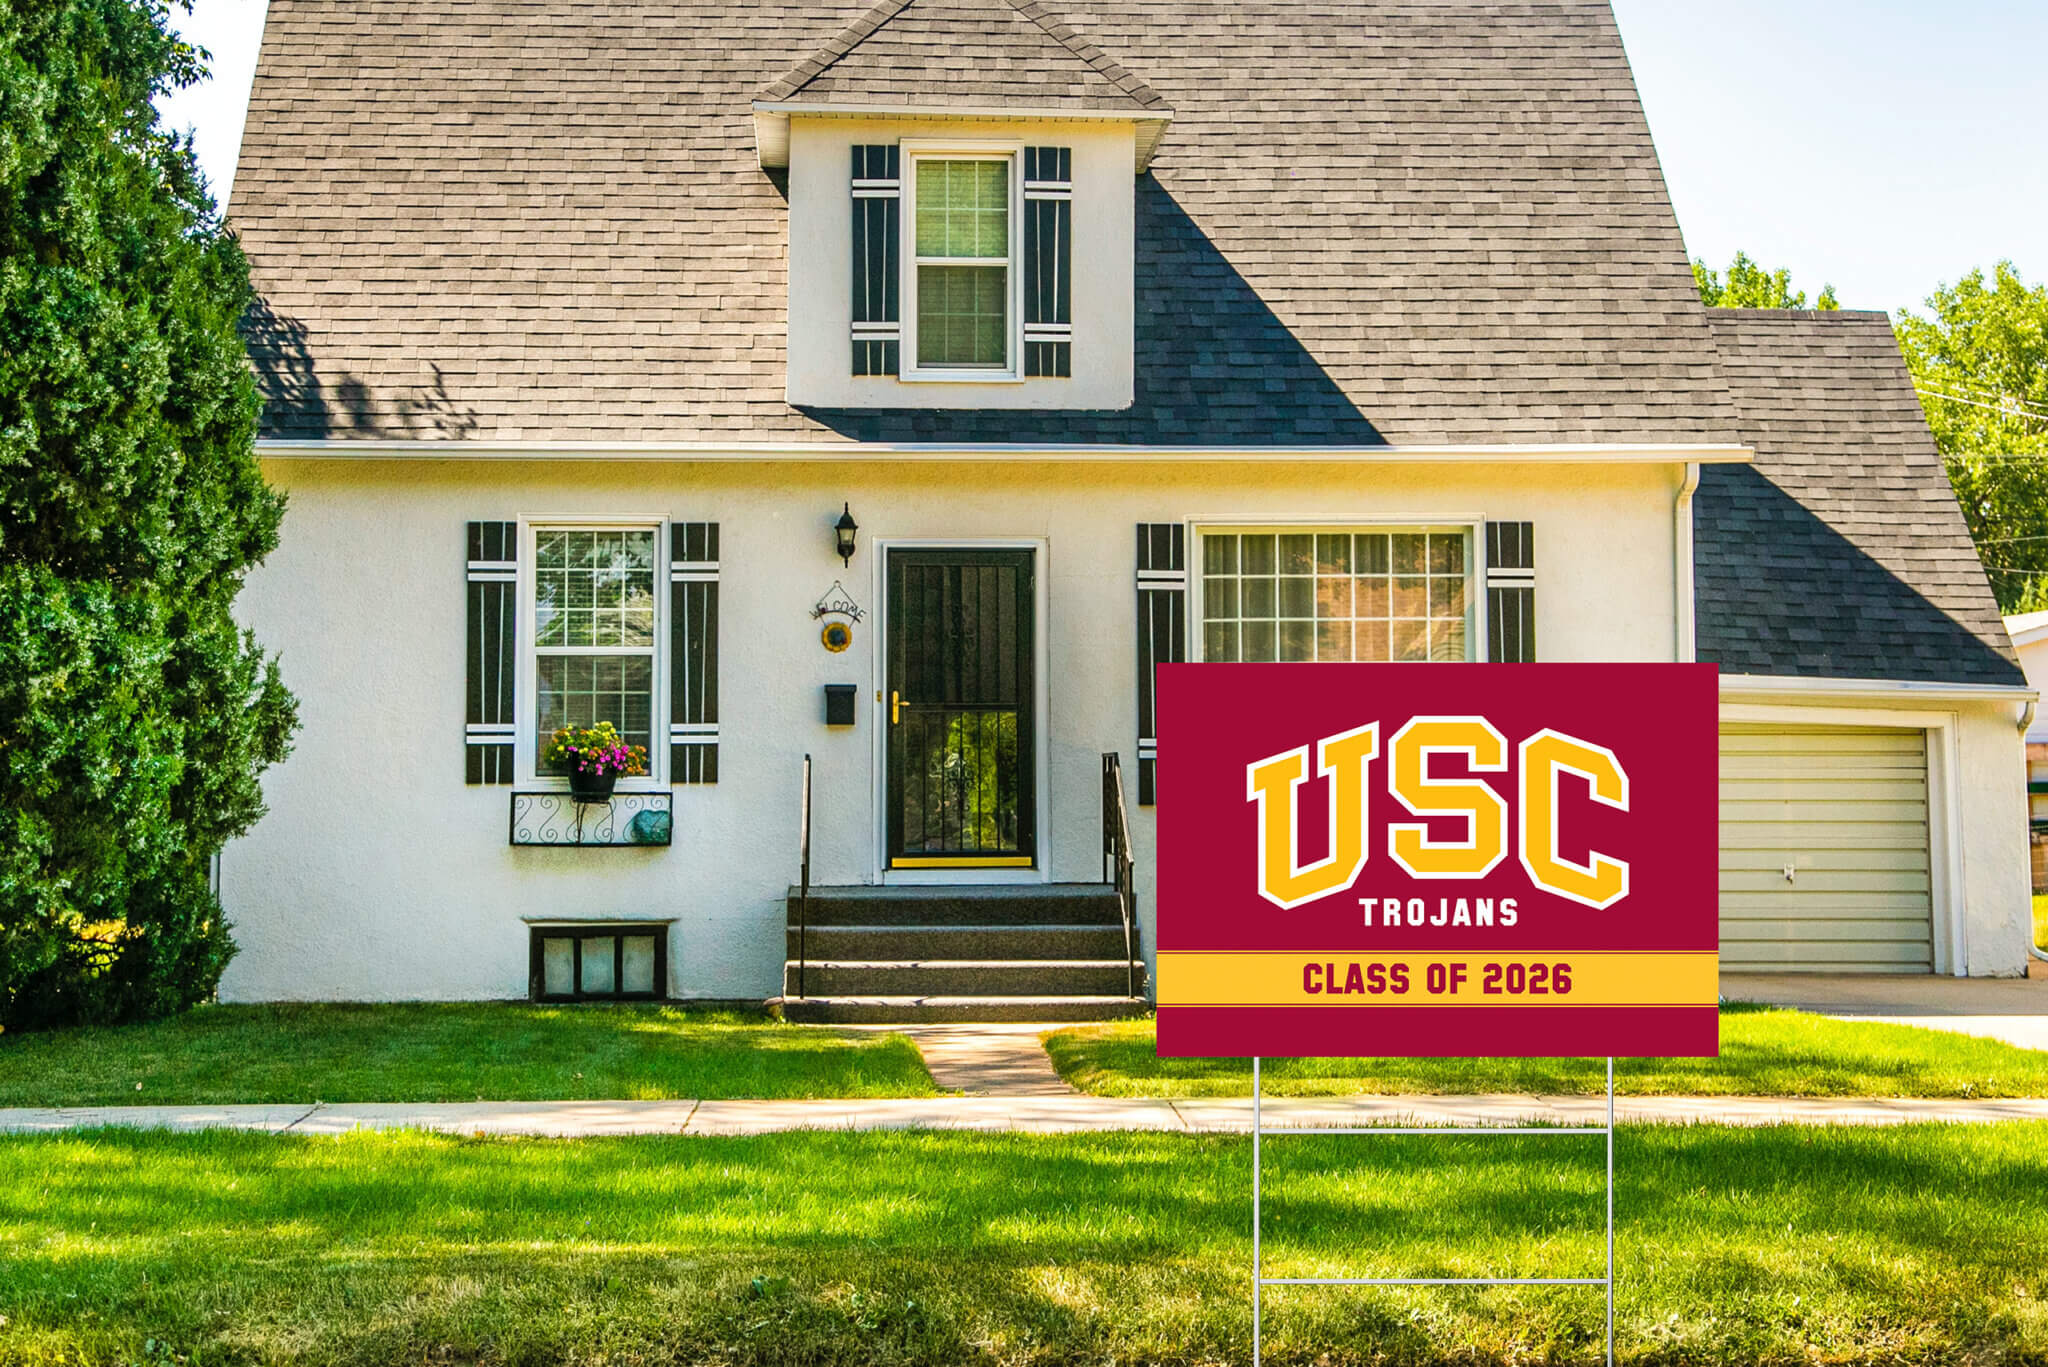 USC Trojans Yard Sign 2026 USC Book Stores